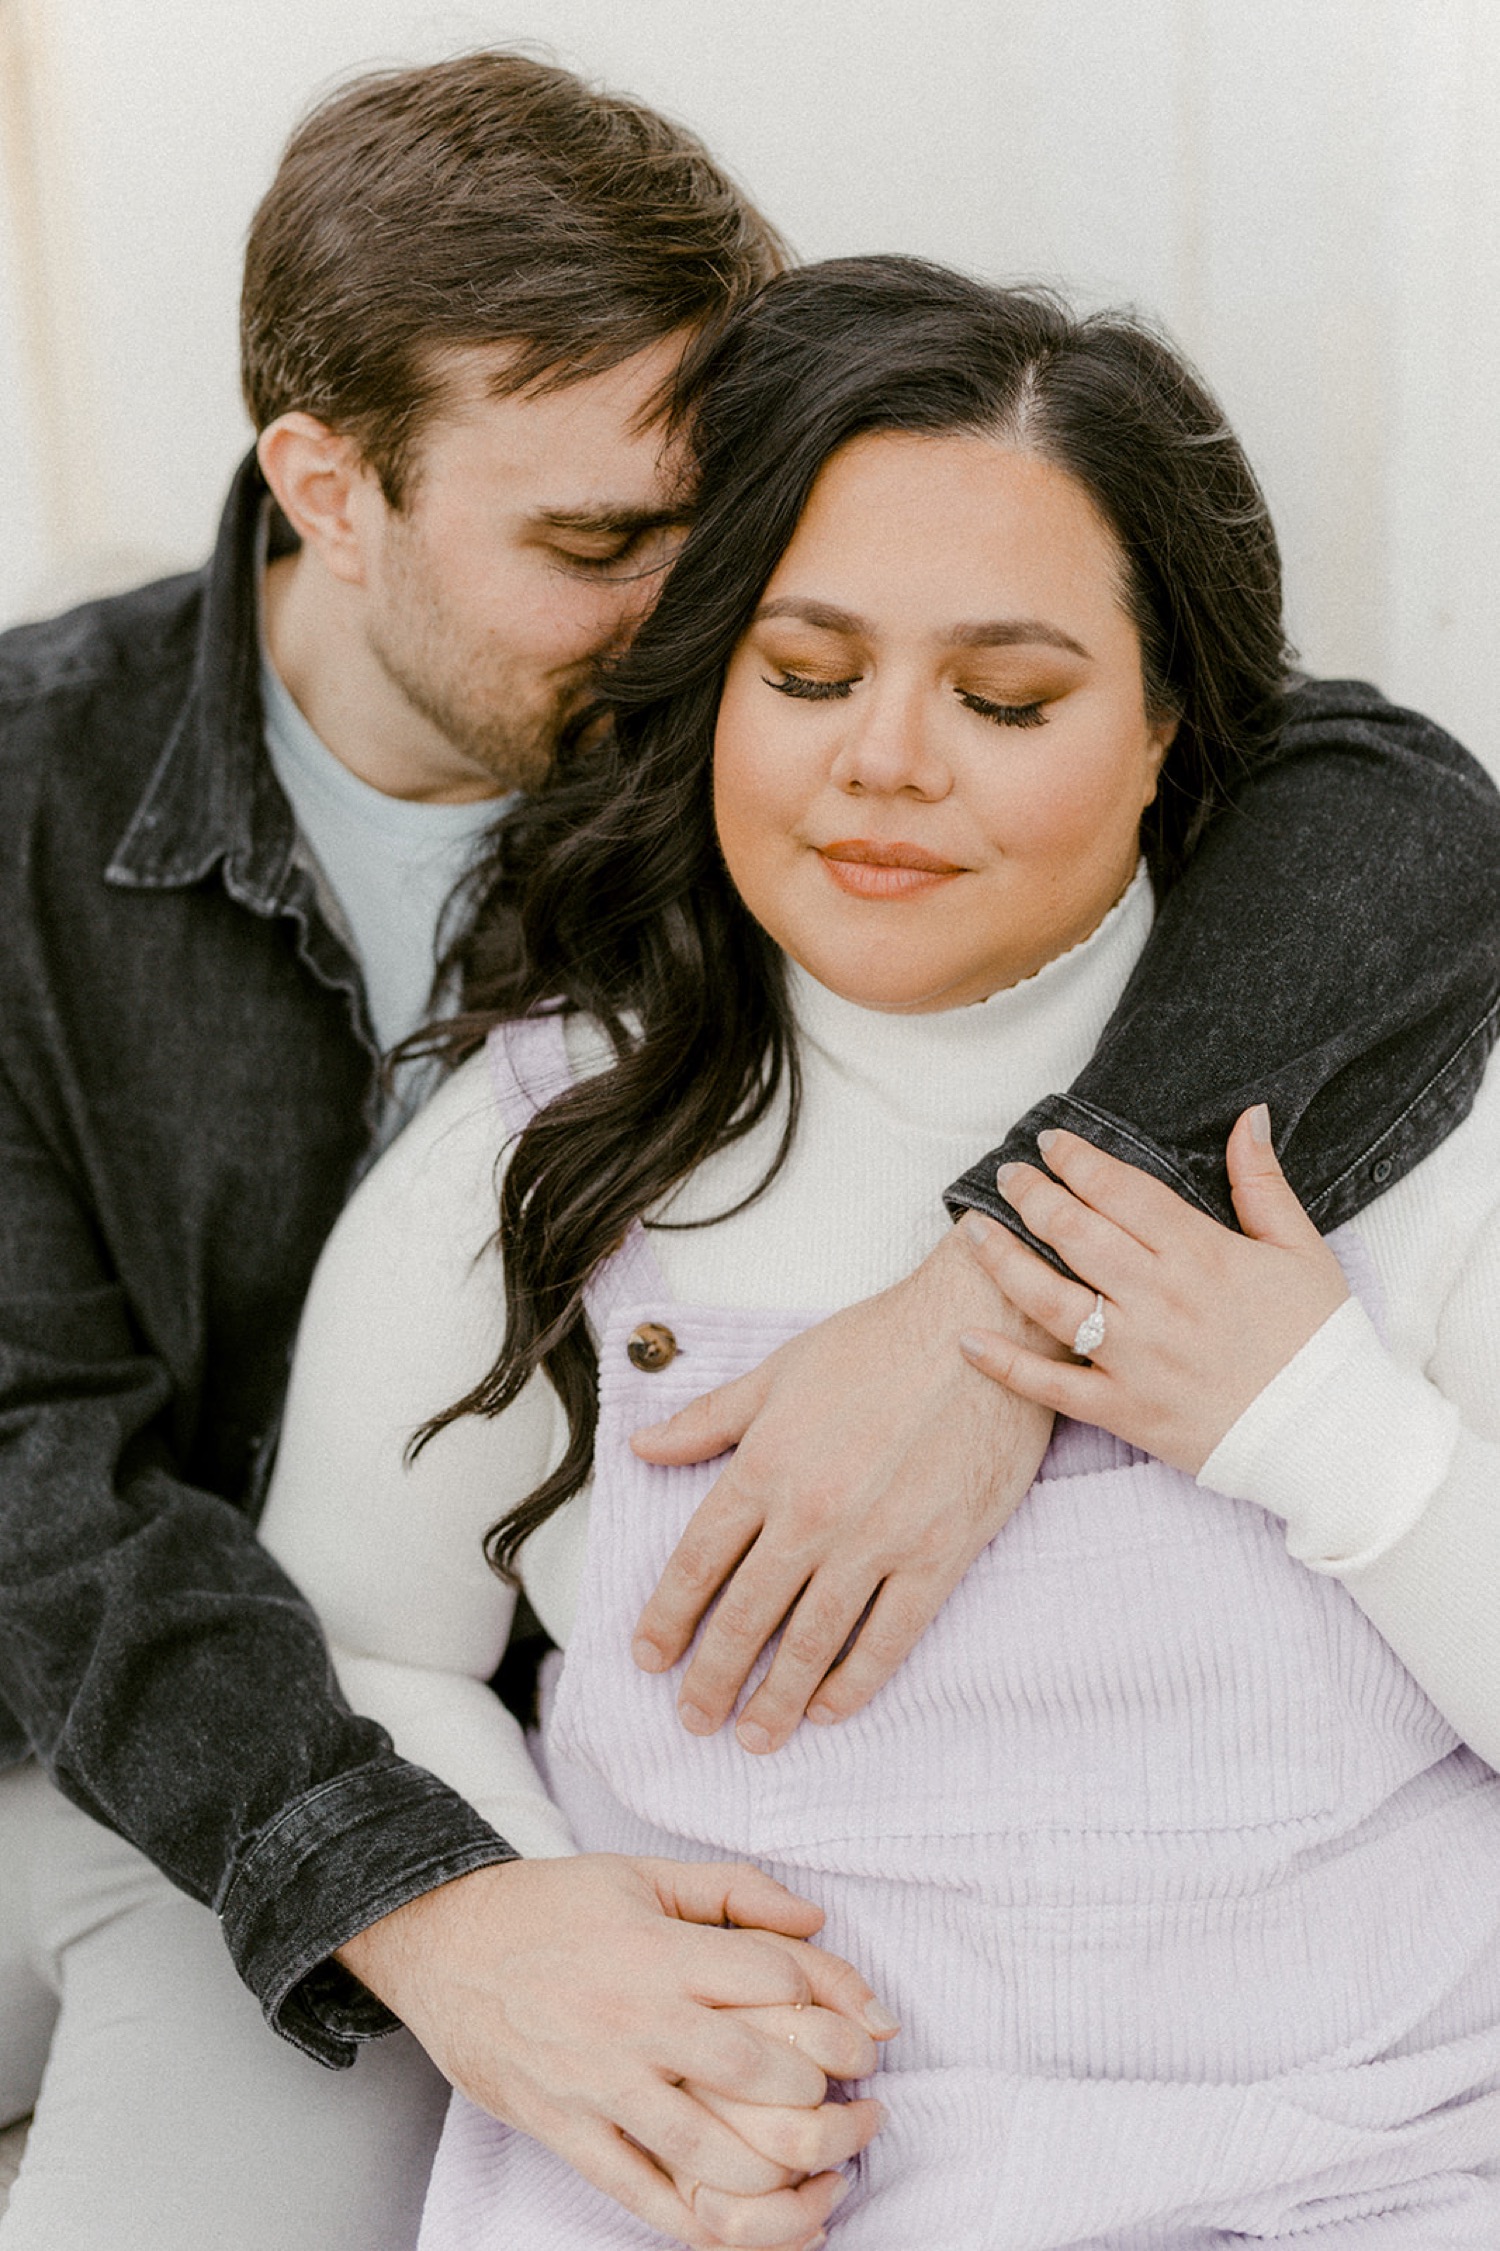 couple engagement session eyes closed embracing